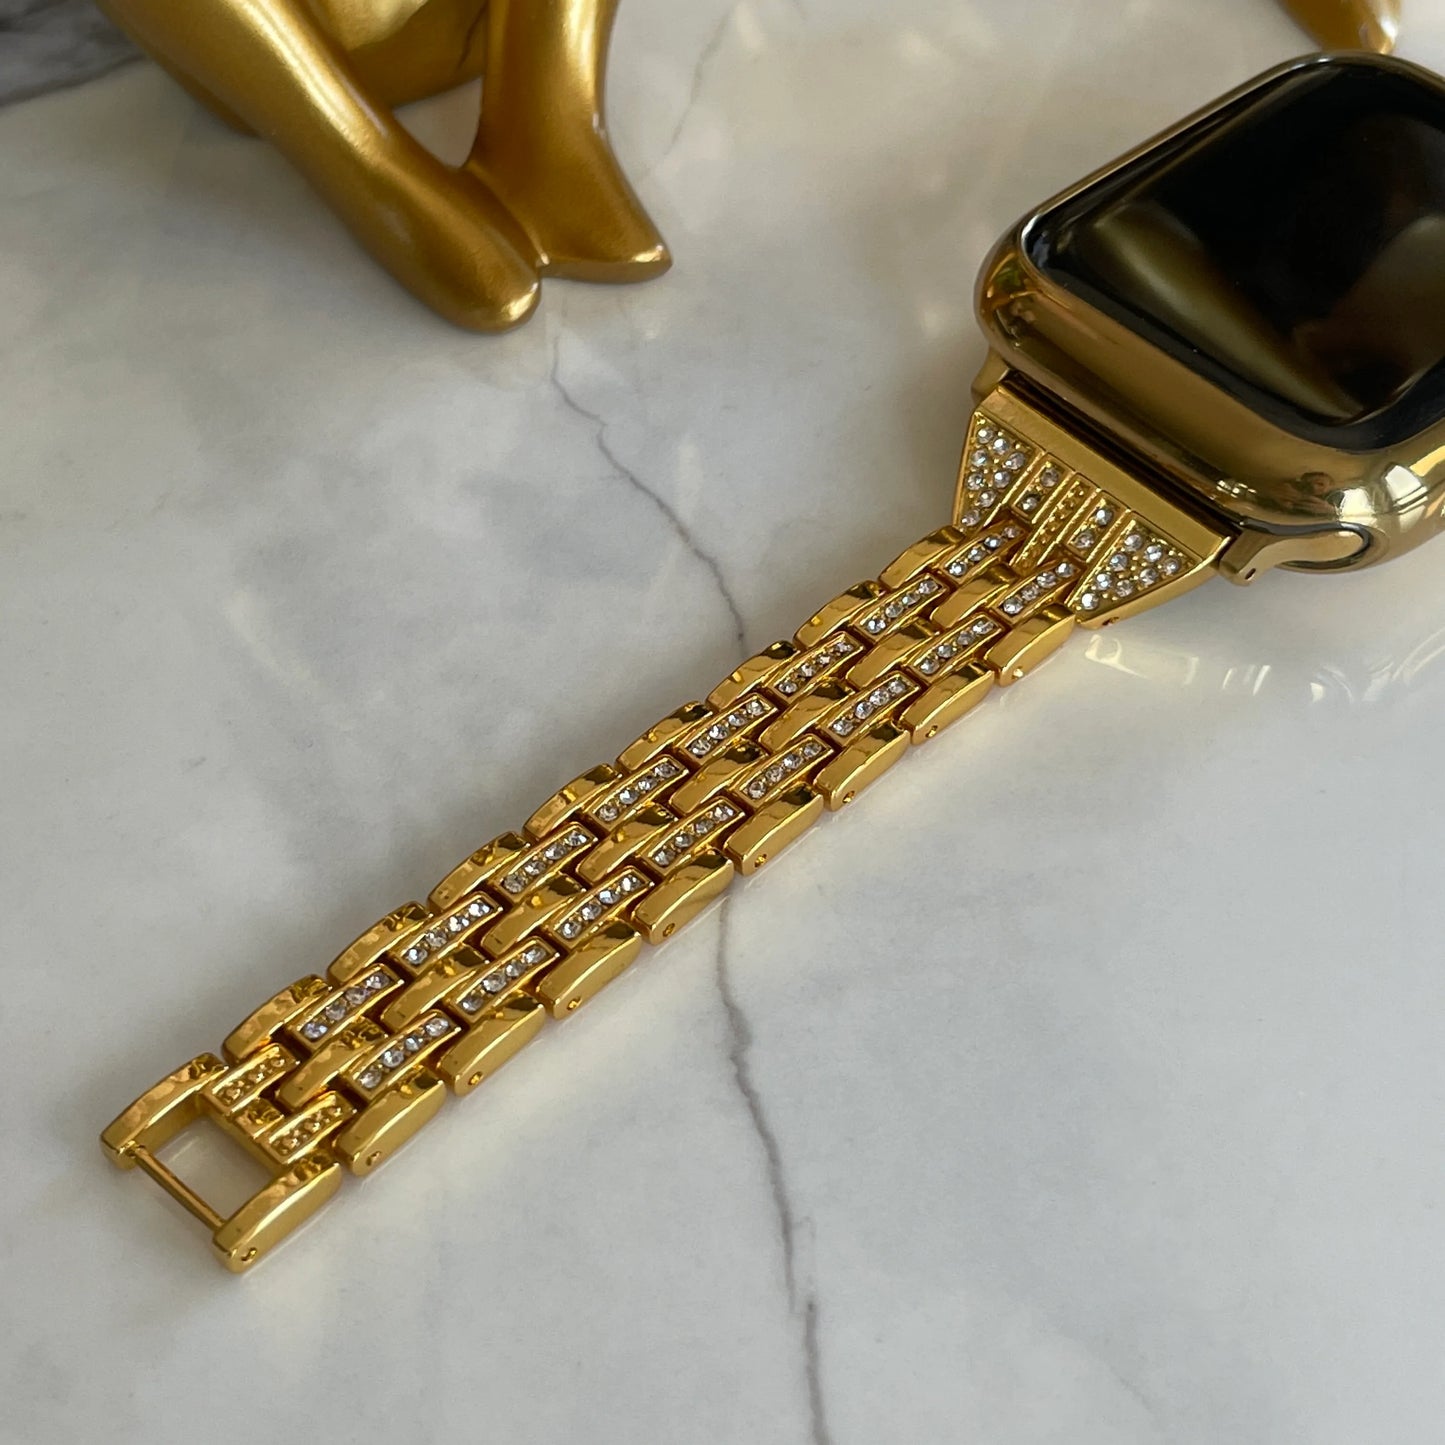 JACKIE Diamante Apple Watch Case & Band